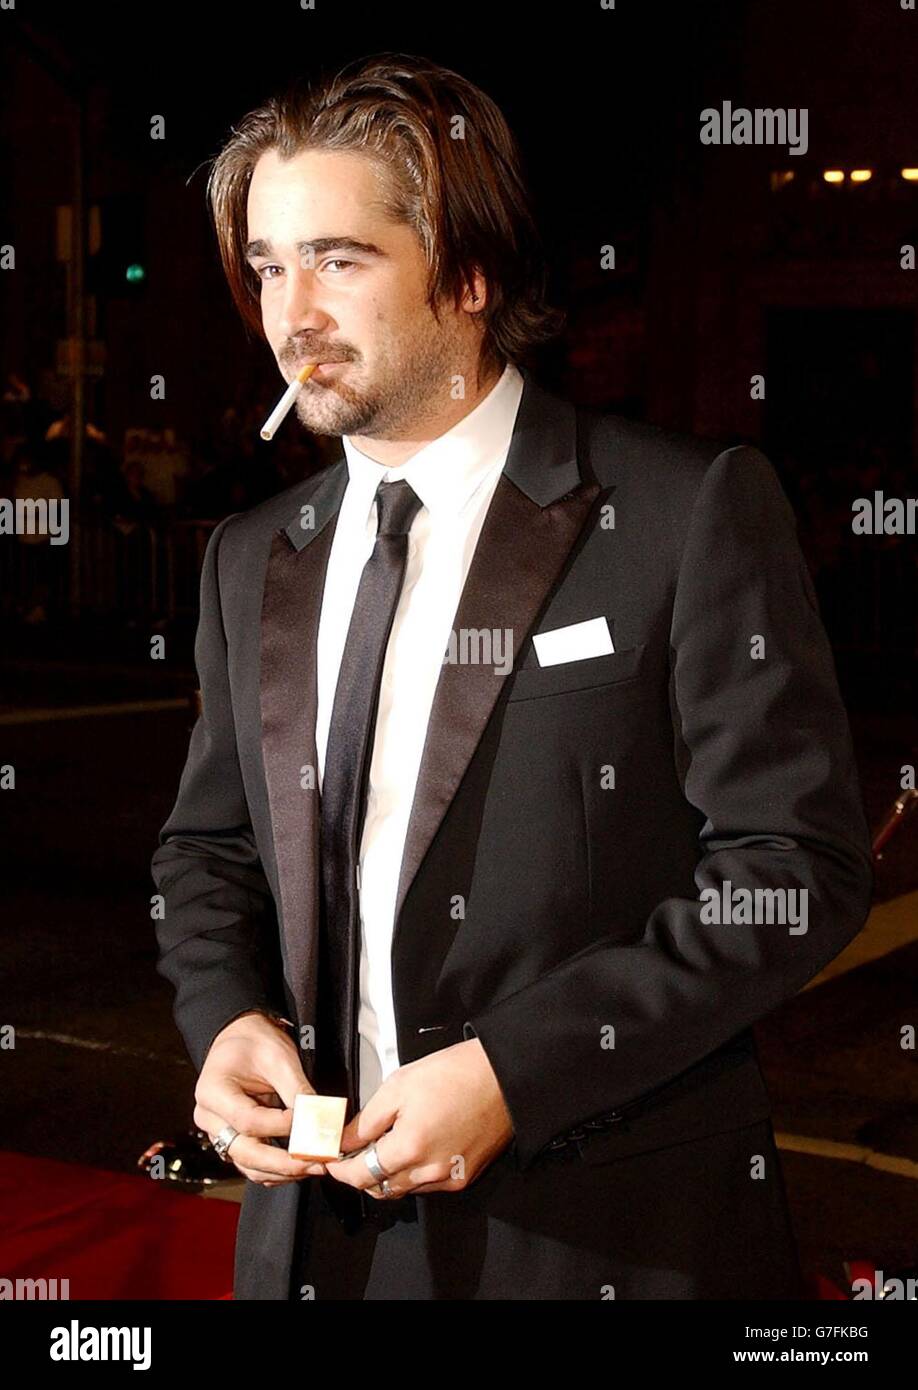 Actor Colin Farrell arrives for the premiere of his latest film Alexander, held in Los Angeles, USA. Stock Photo